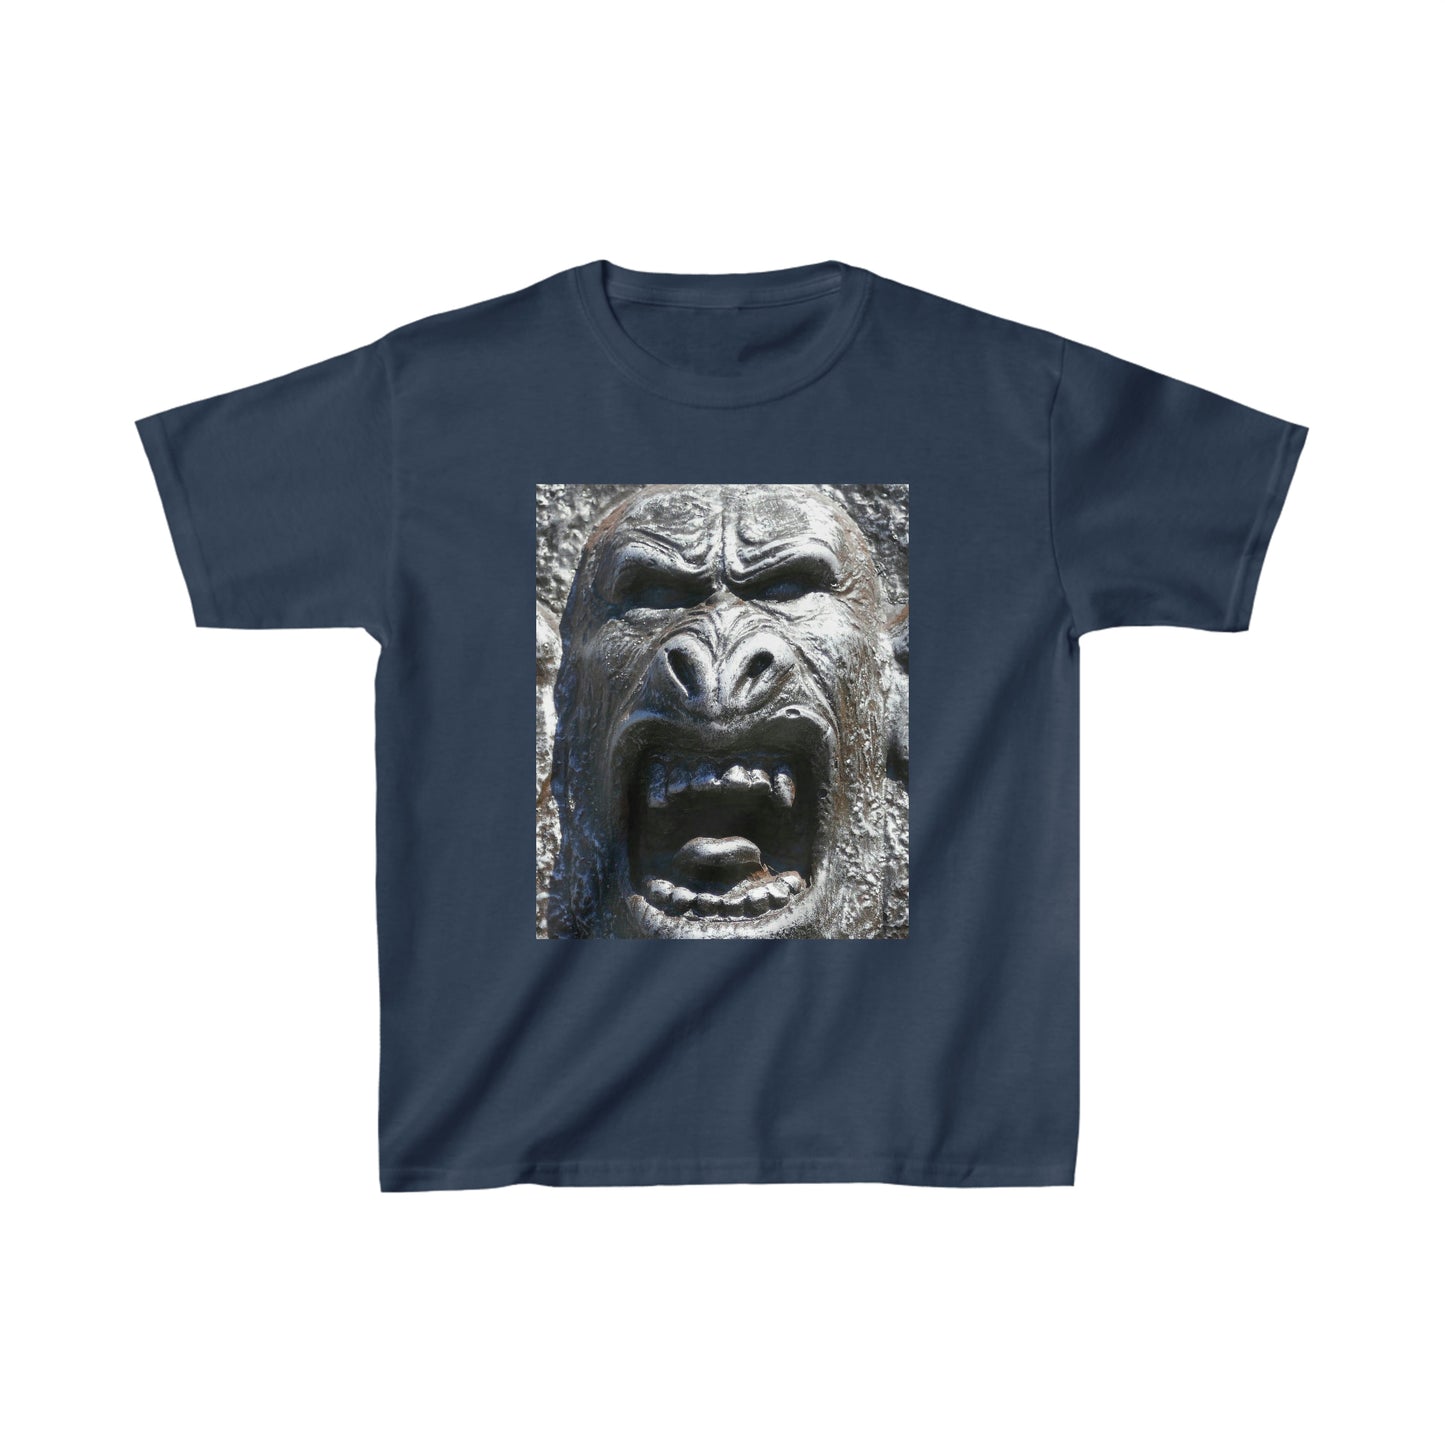 Frenzy Scream - Kids Cotton Tee - Fry1Productions